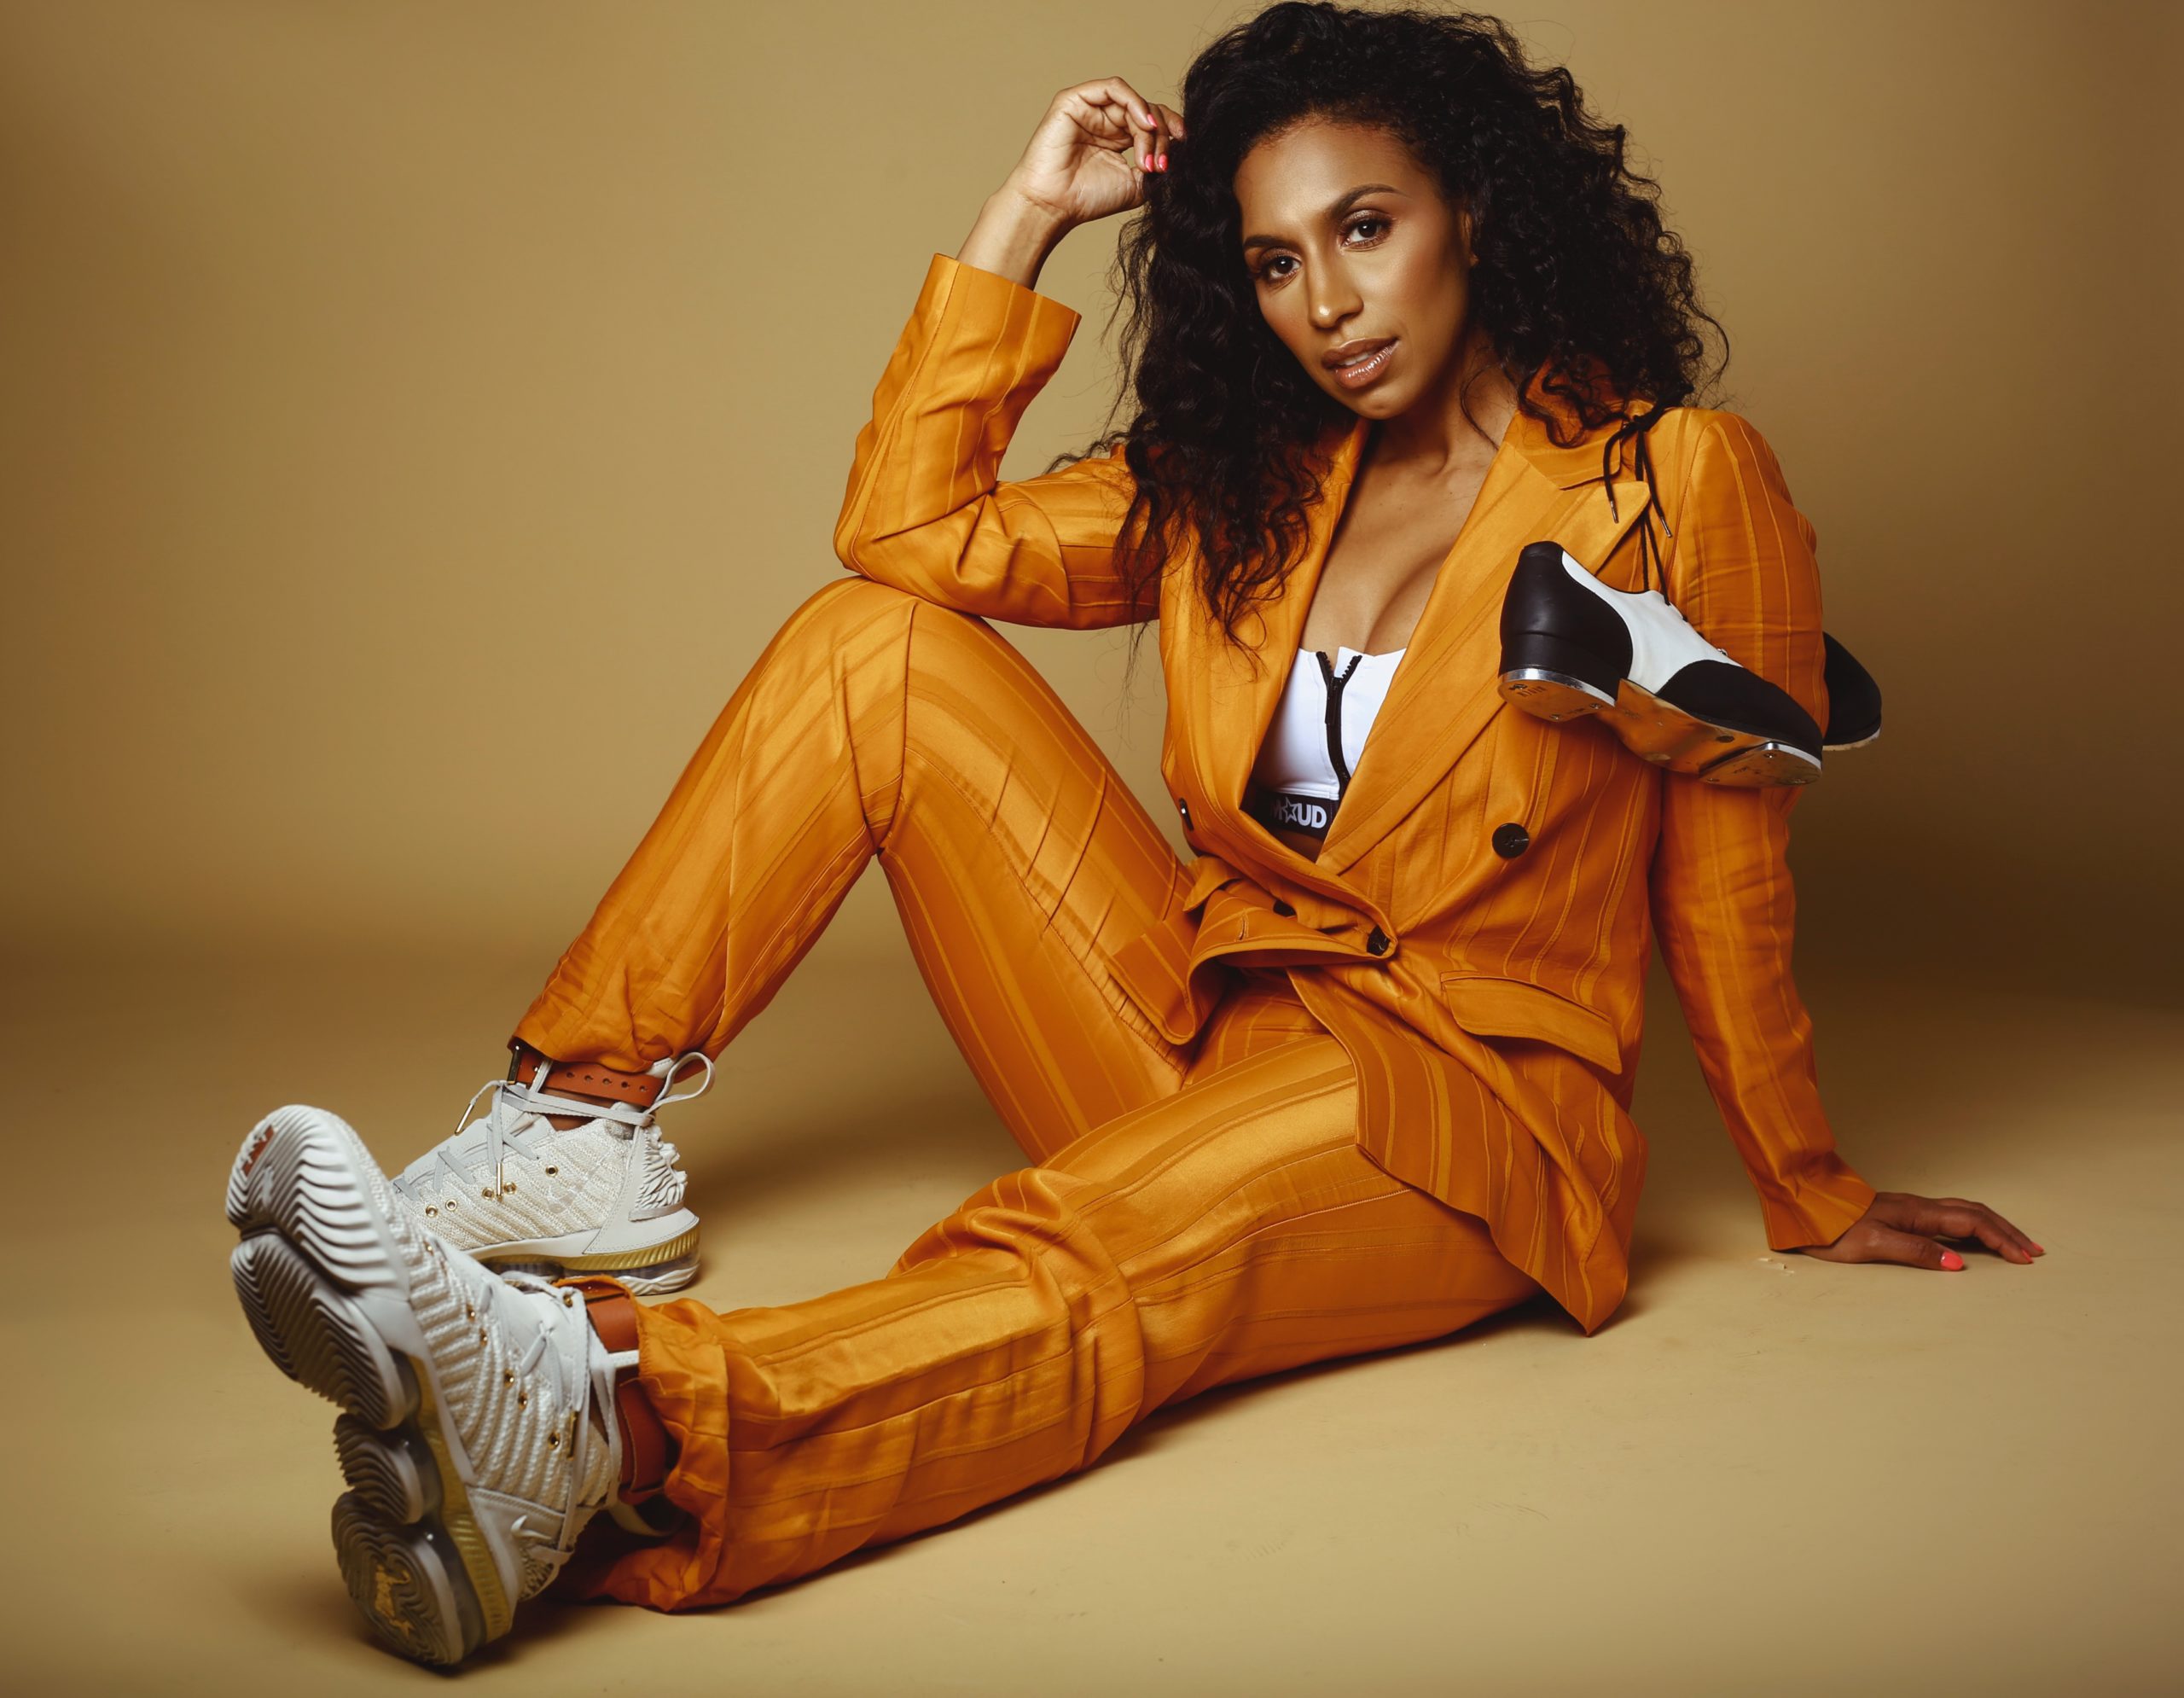 Tap dancer Chloe Arnold in an orange suit sits on the floor with tap shoes across her shoulder